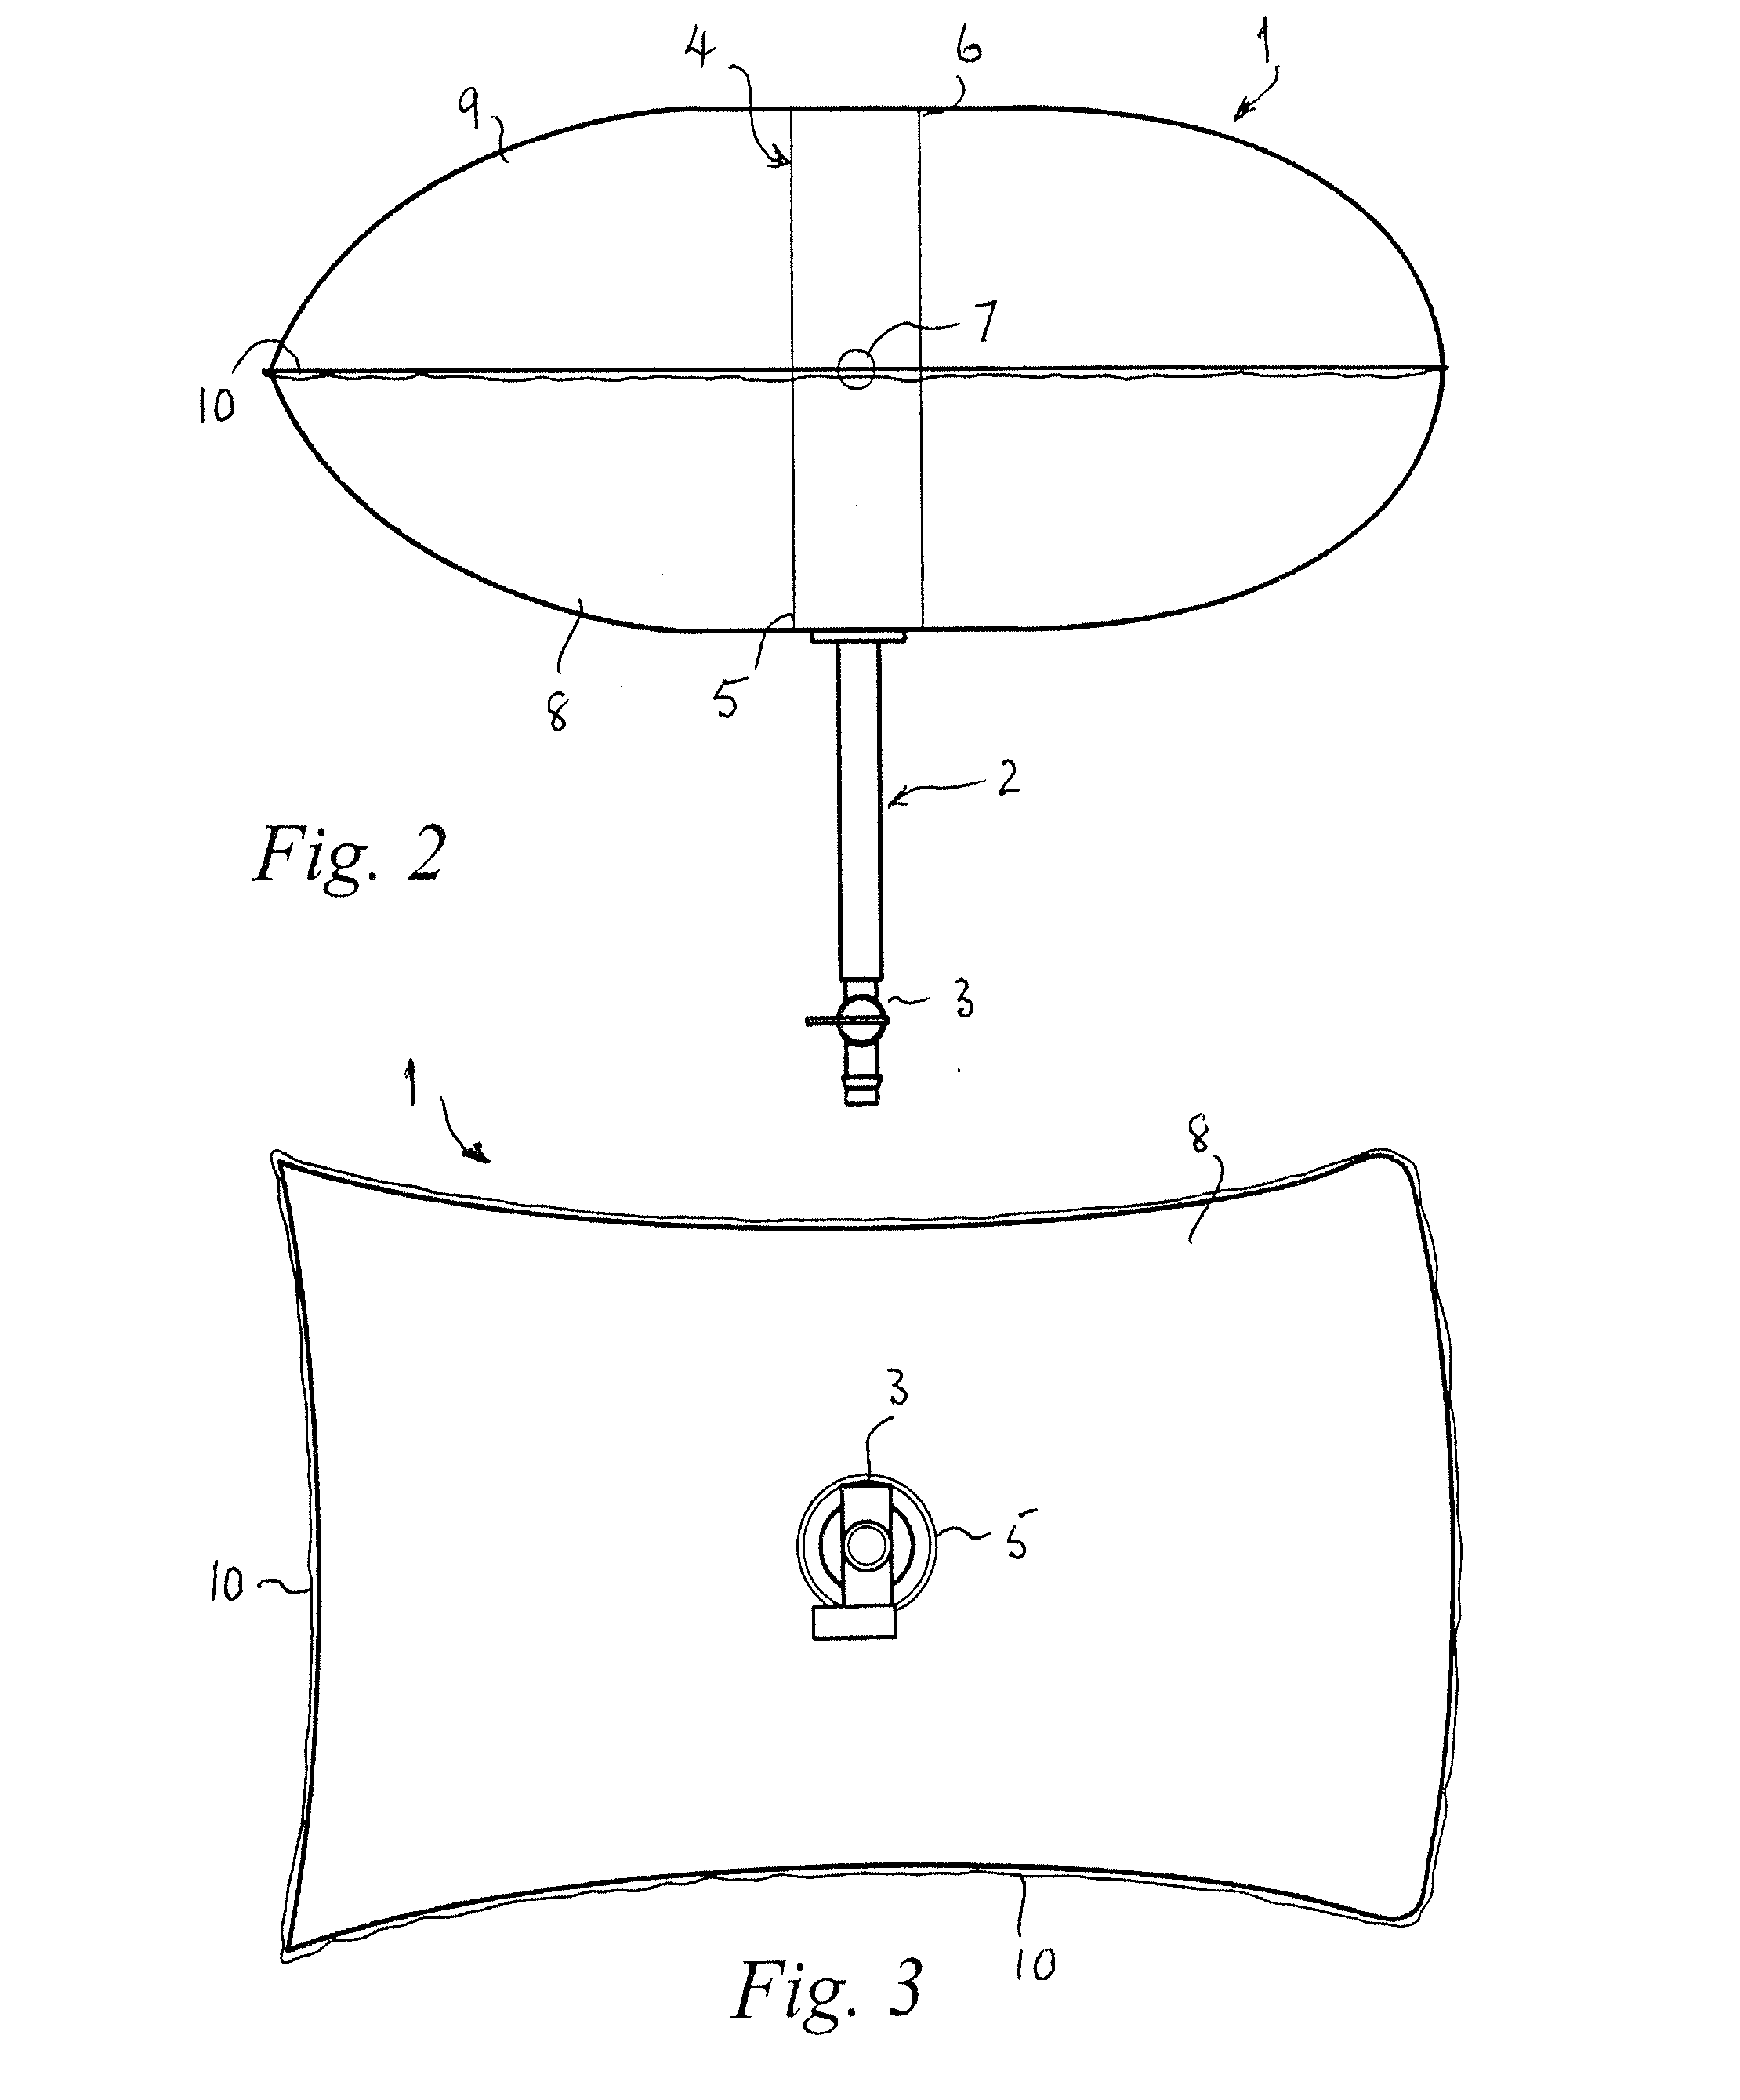 Inflatable device for blocking chimney flues or other ducts